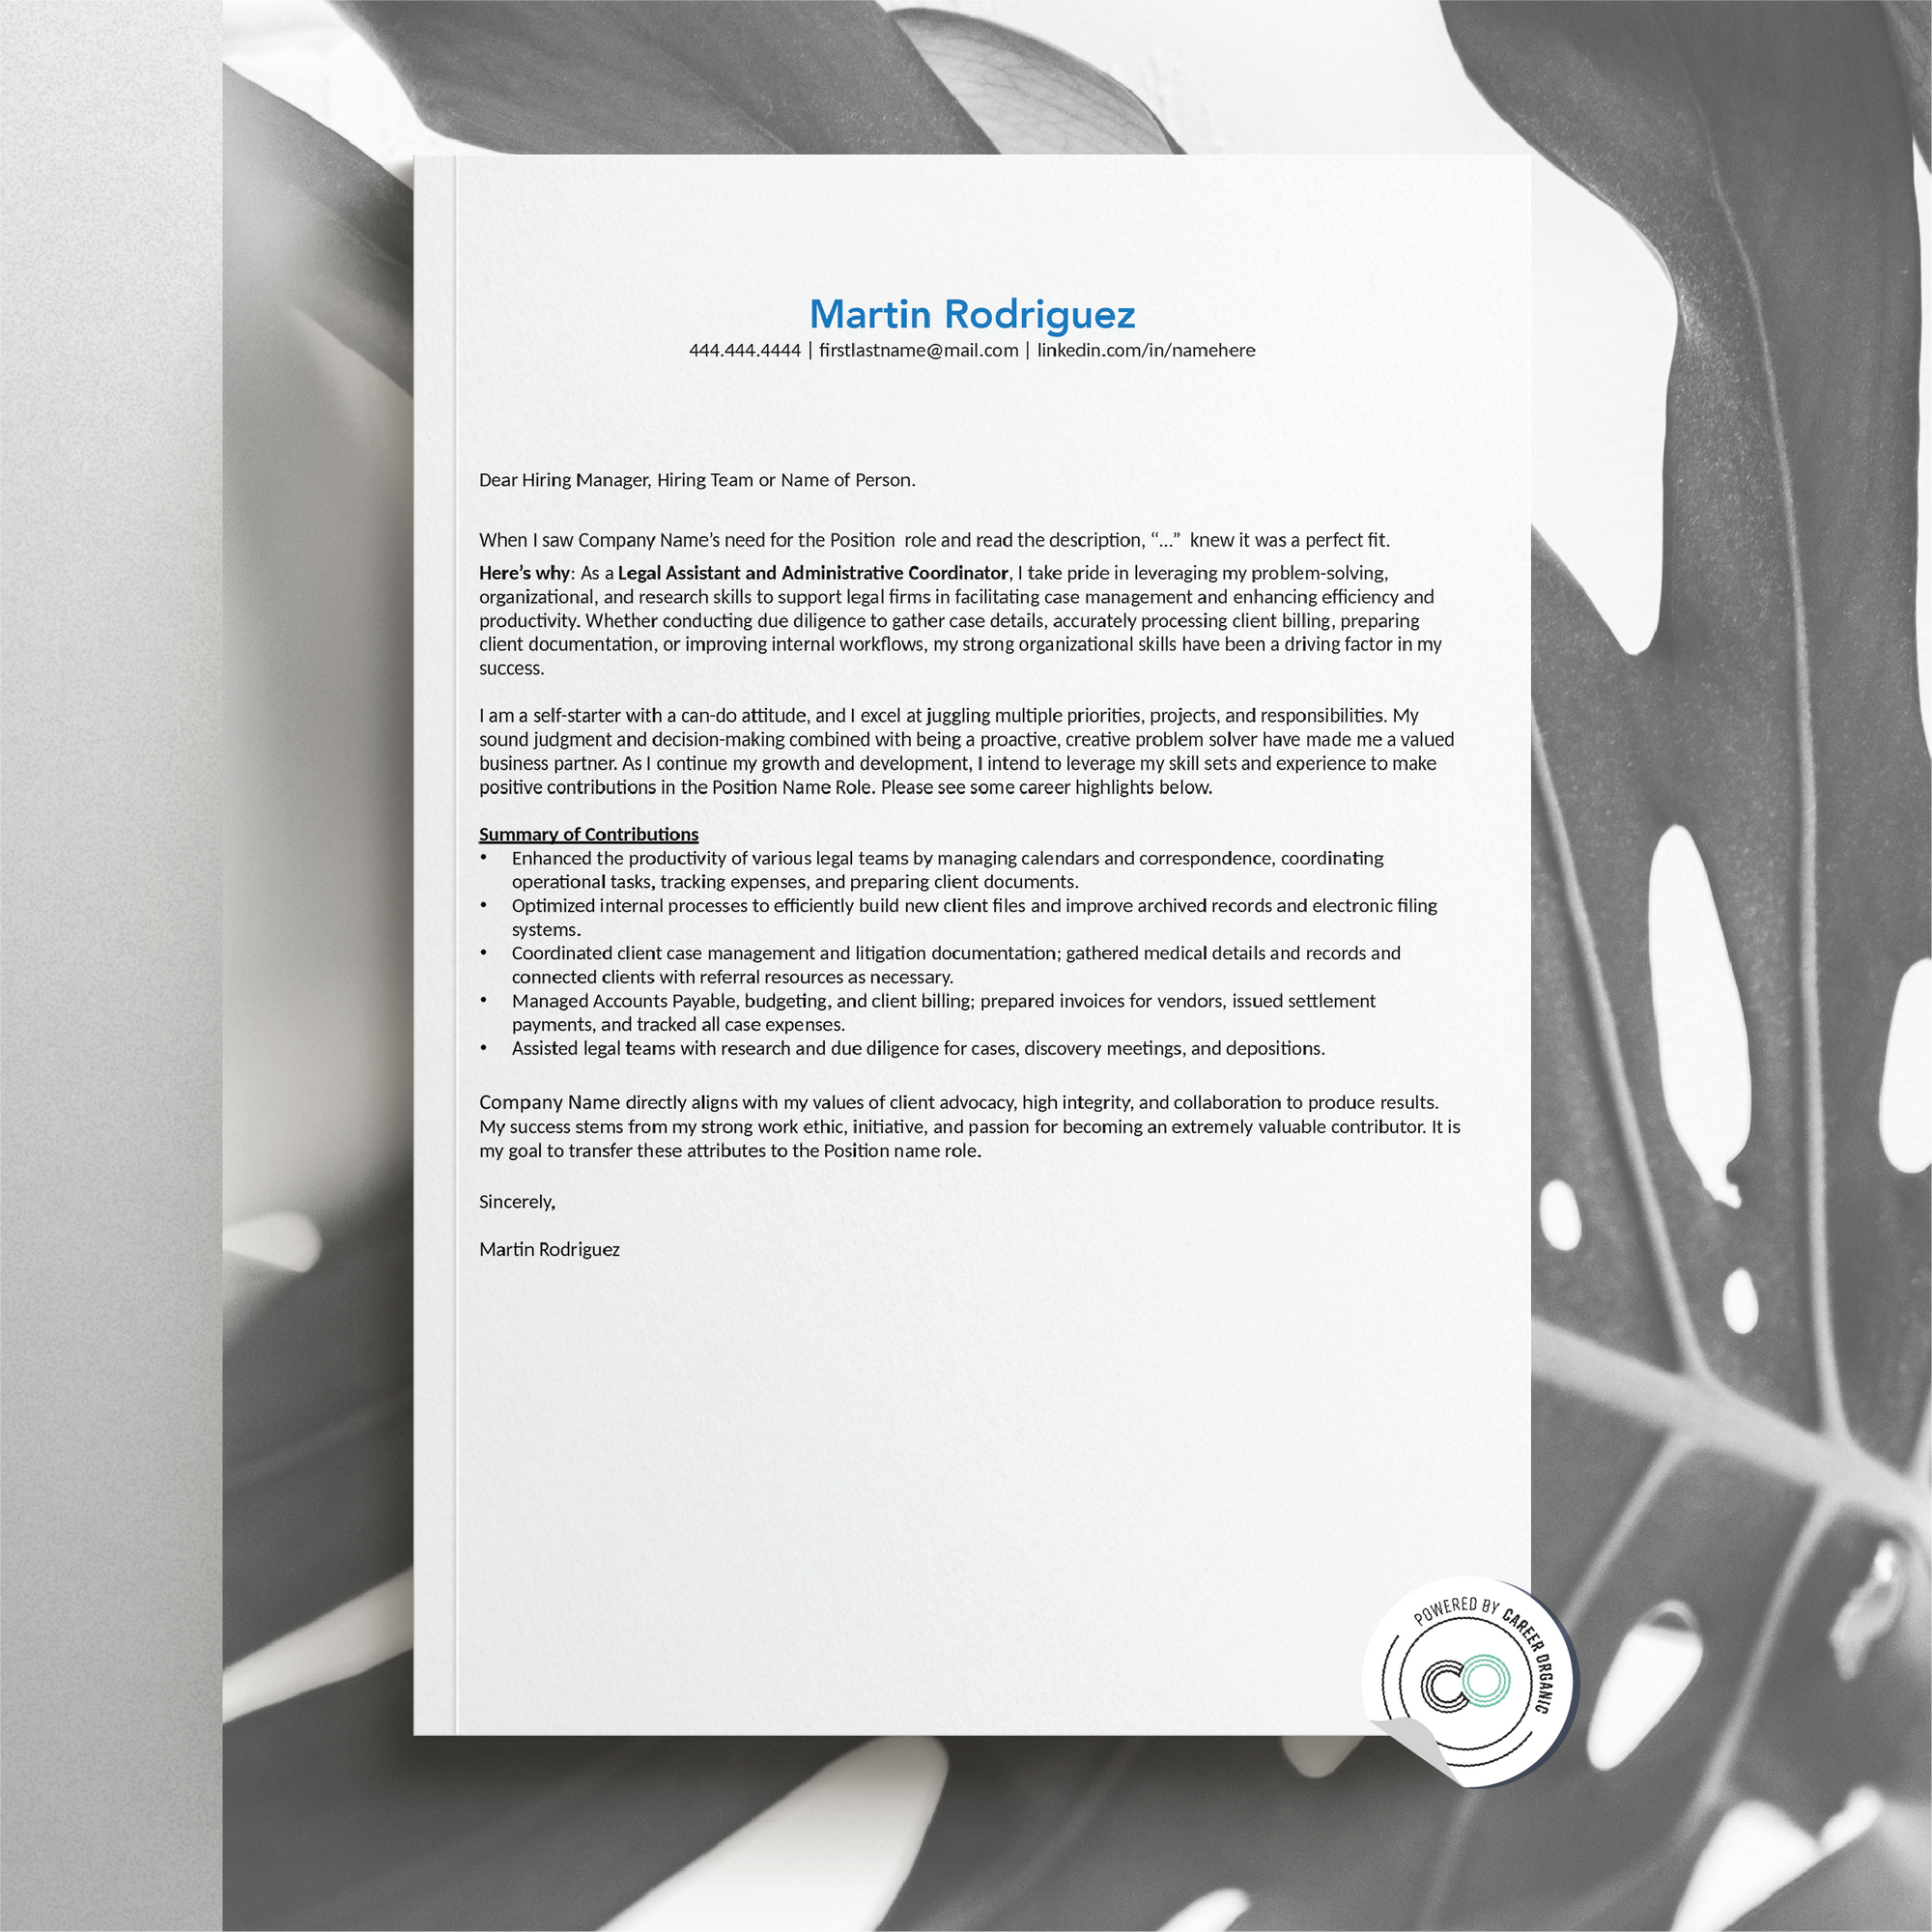 Career Organic Sample Cover letter on a natural background